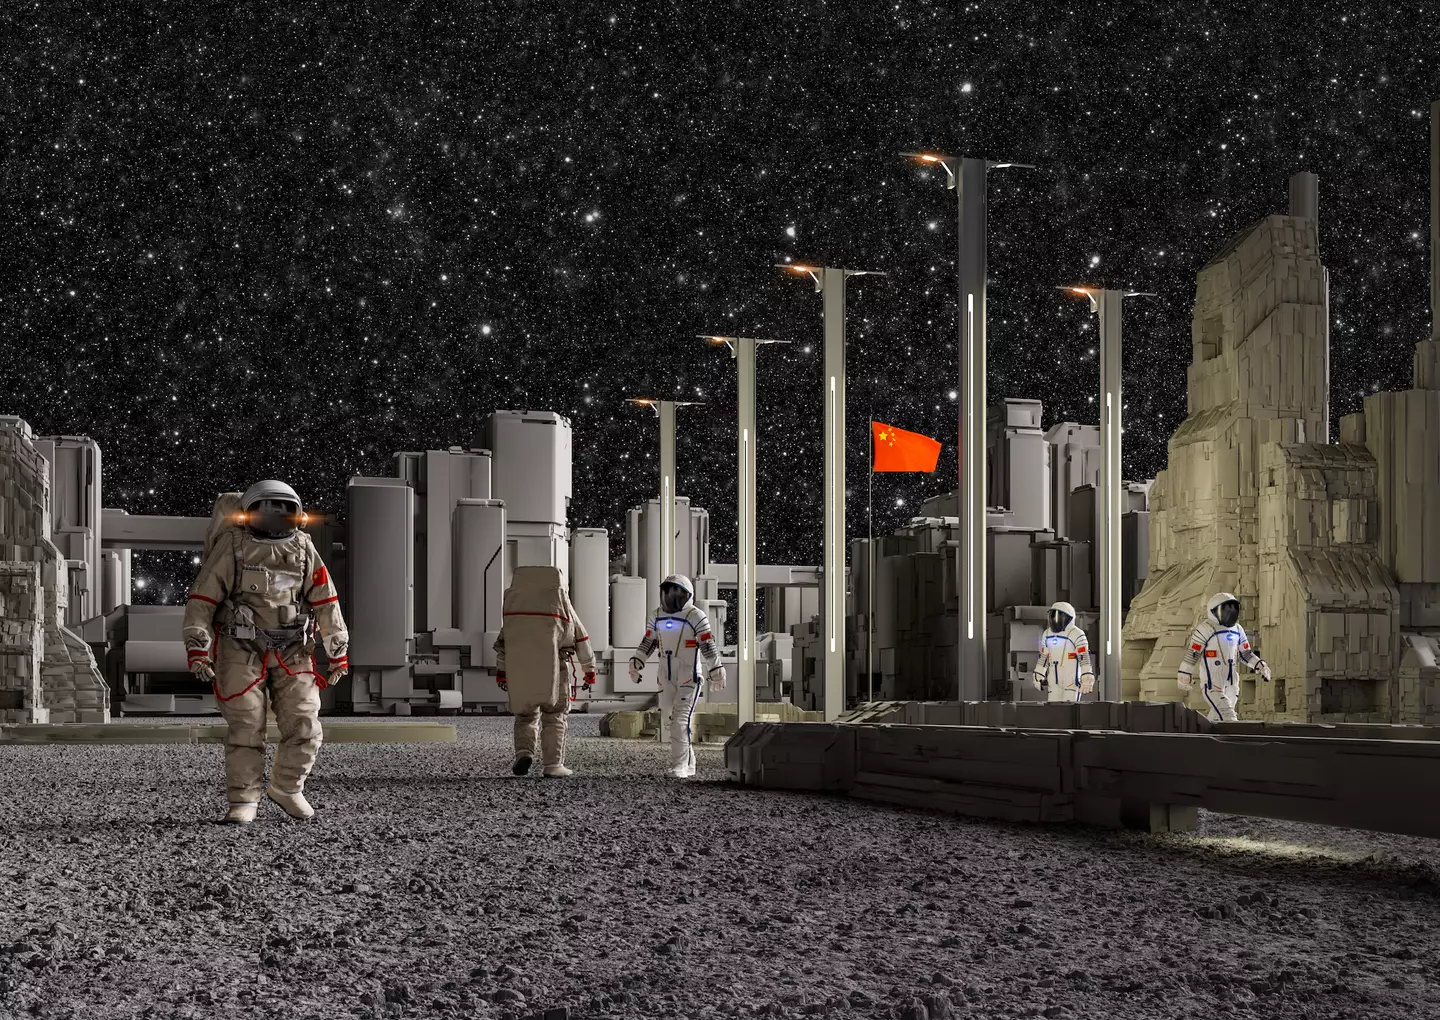 A concept image of what a moon base could look like.